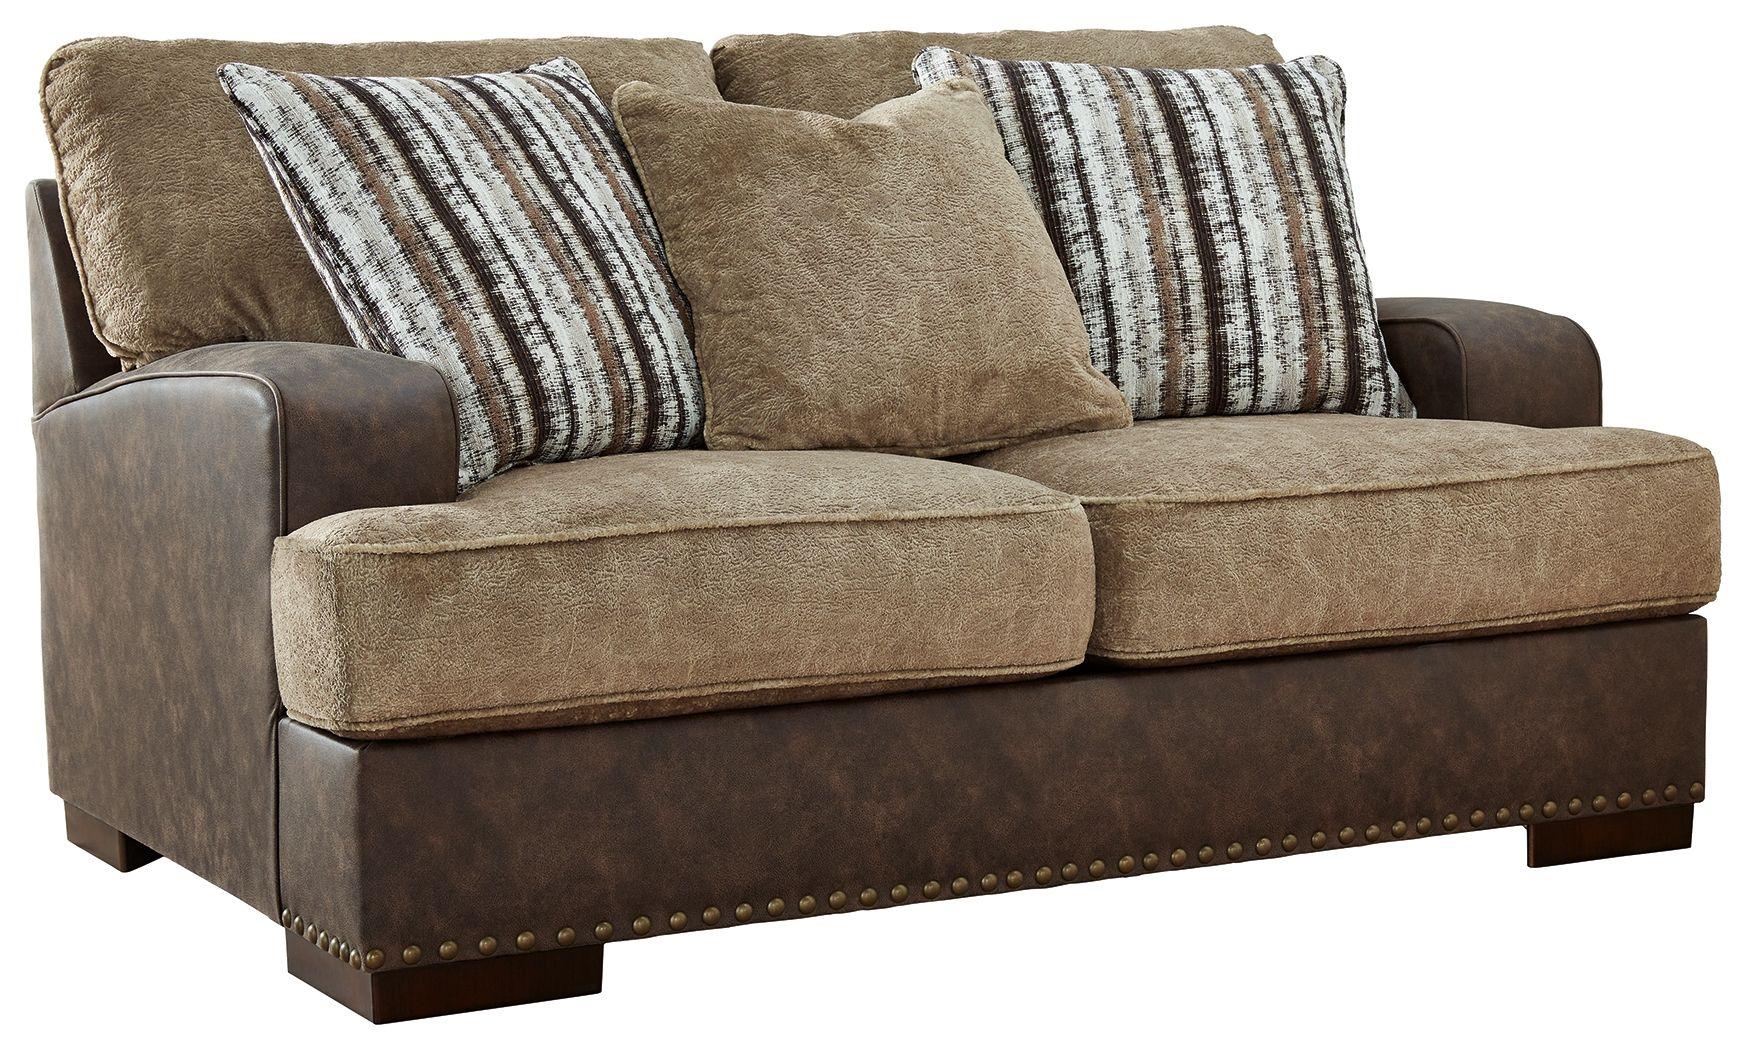 Signature Design by Ashley® - Alesbury - Chocolate - Loveseat - 5th Avenue Furniture